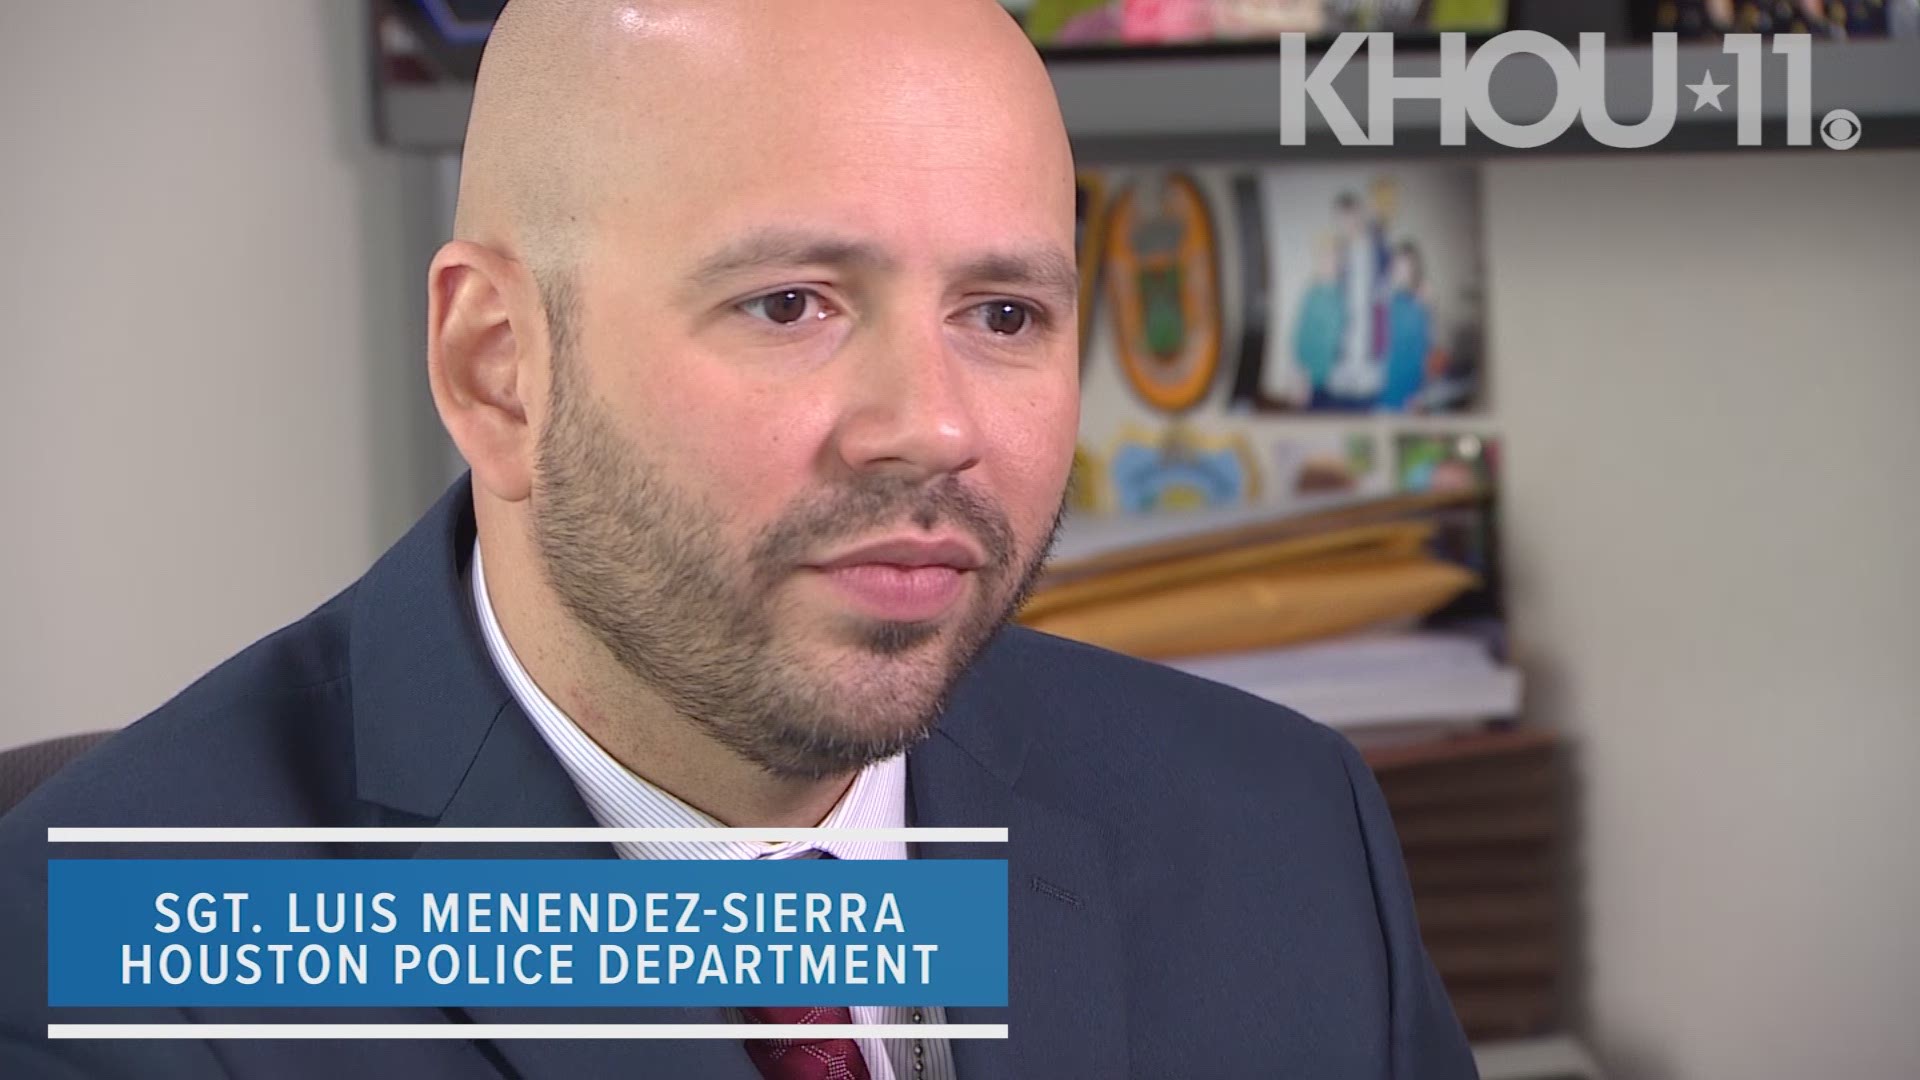 "Just like everything else, photos are valuable to pedophiles," says HPD Sgt. Luis Menendez-Sierra.